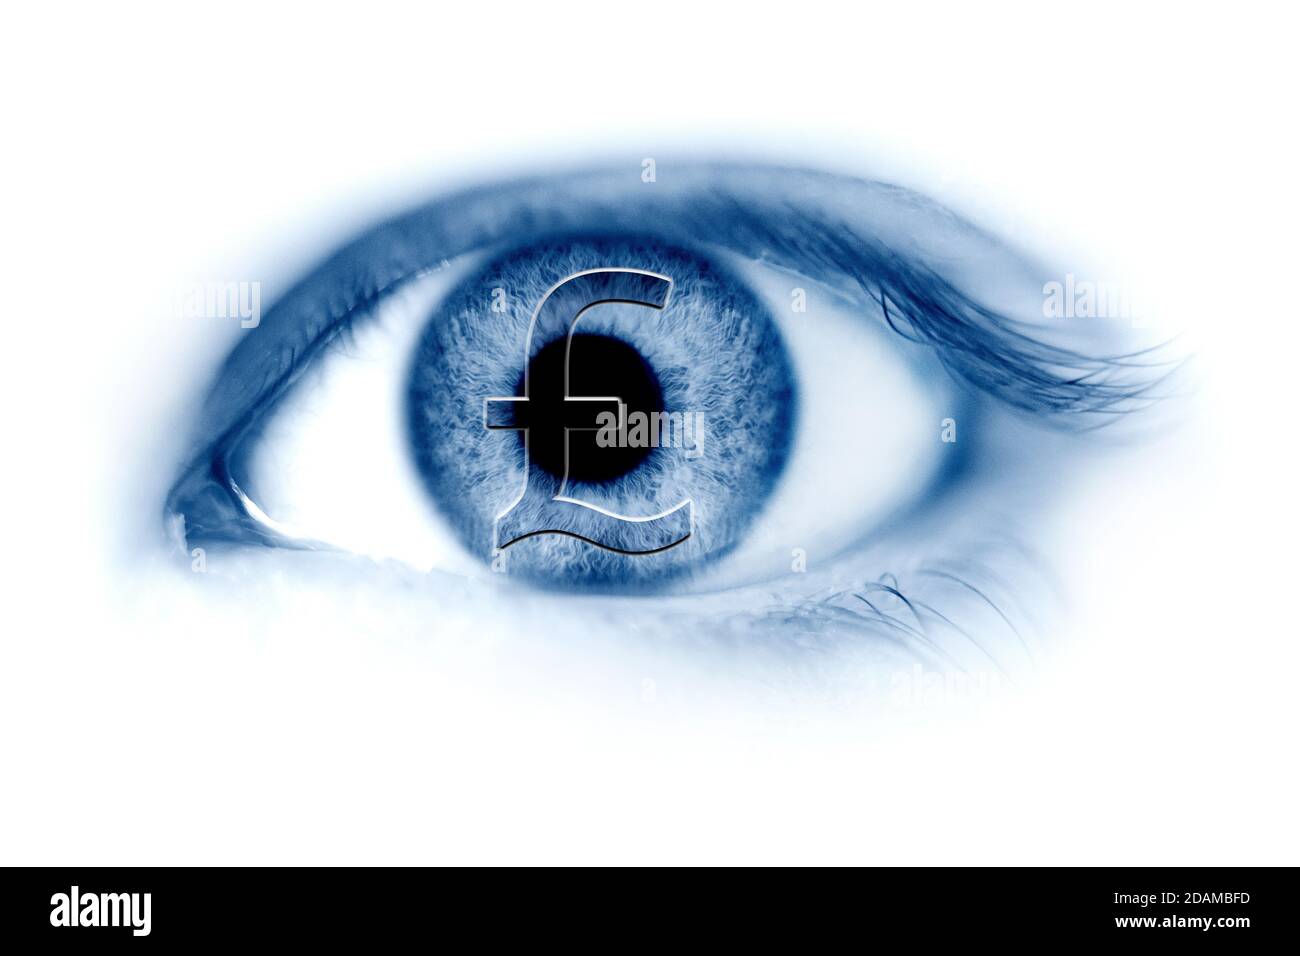 Human eye with pound sterling currency symbol, illustration. Stock Photo